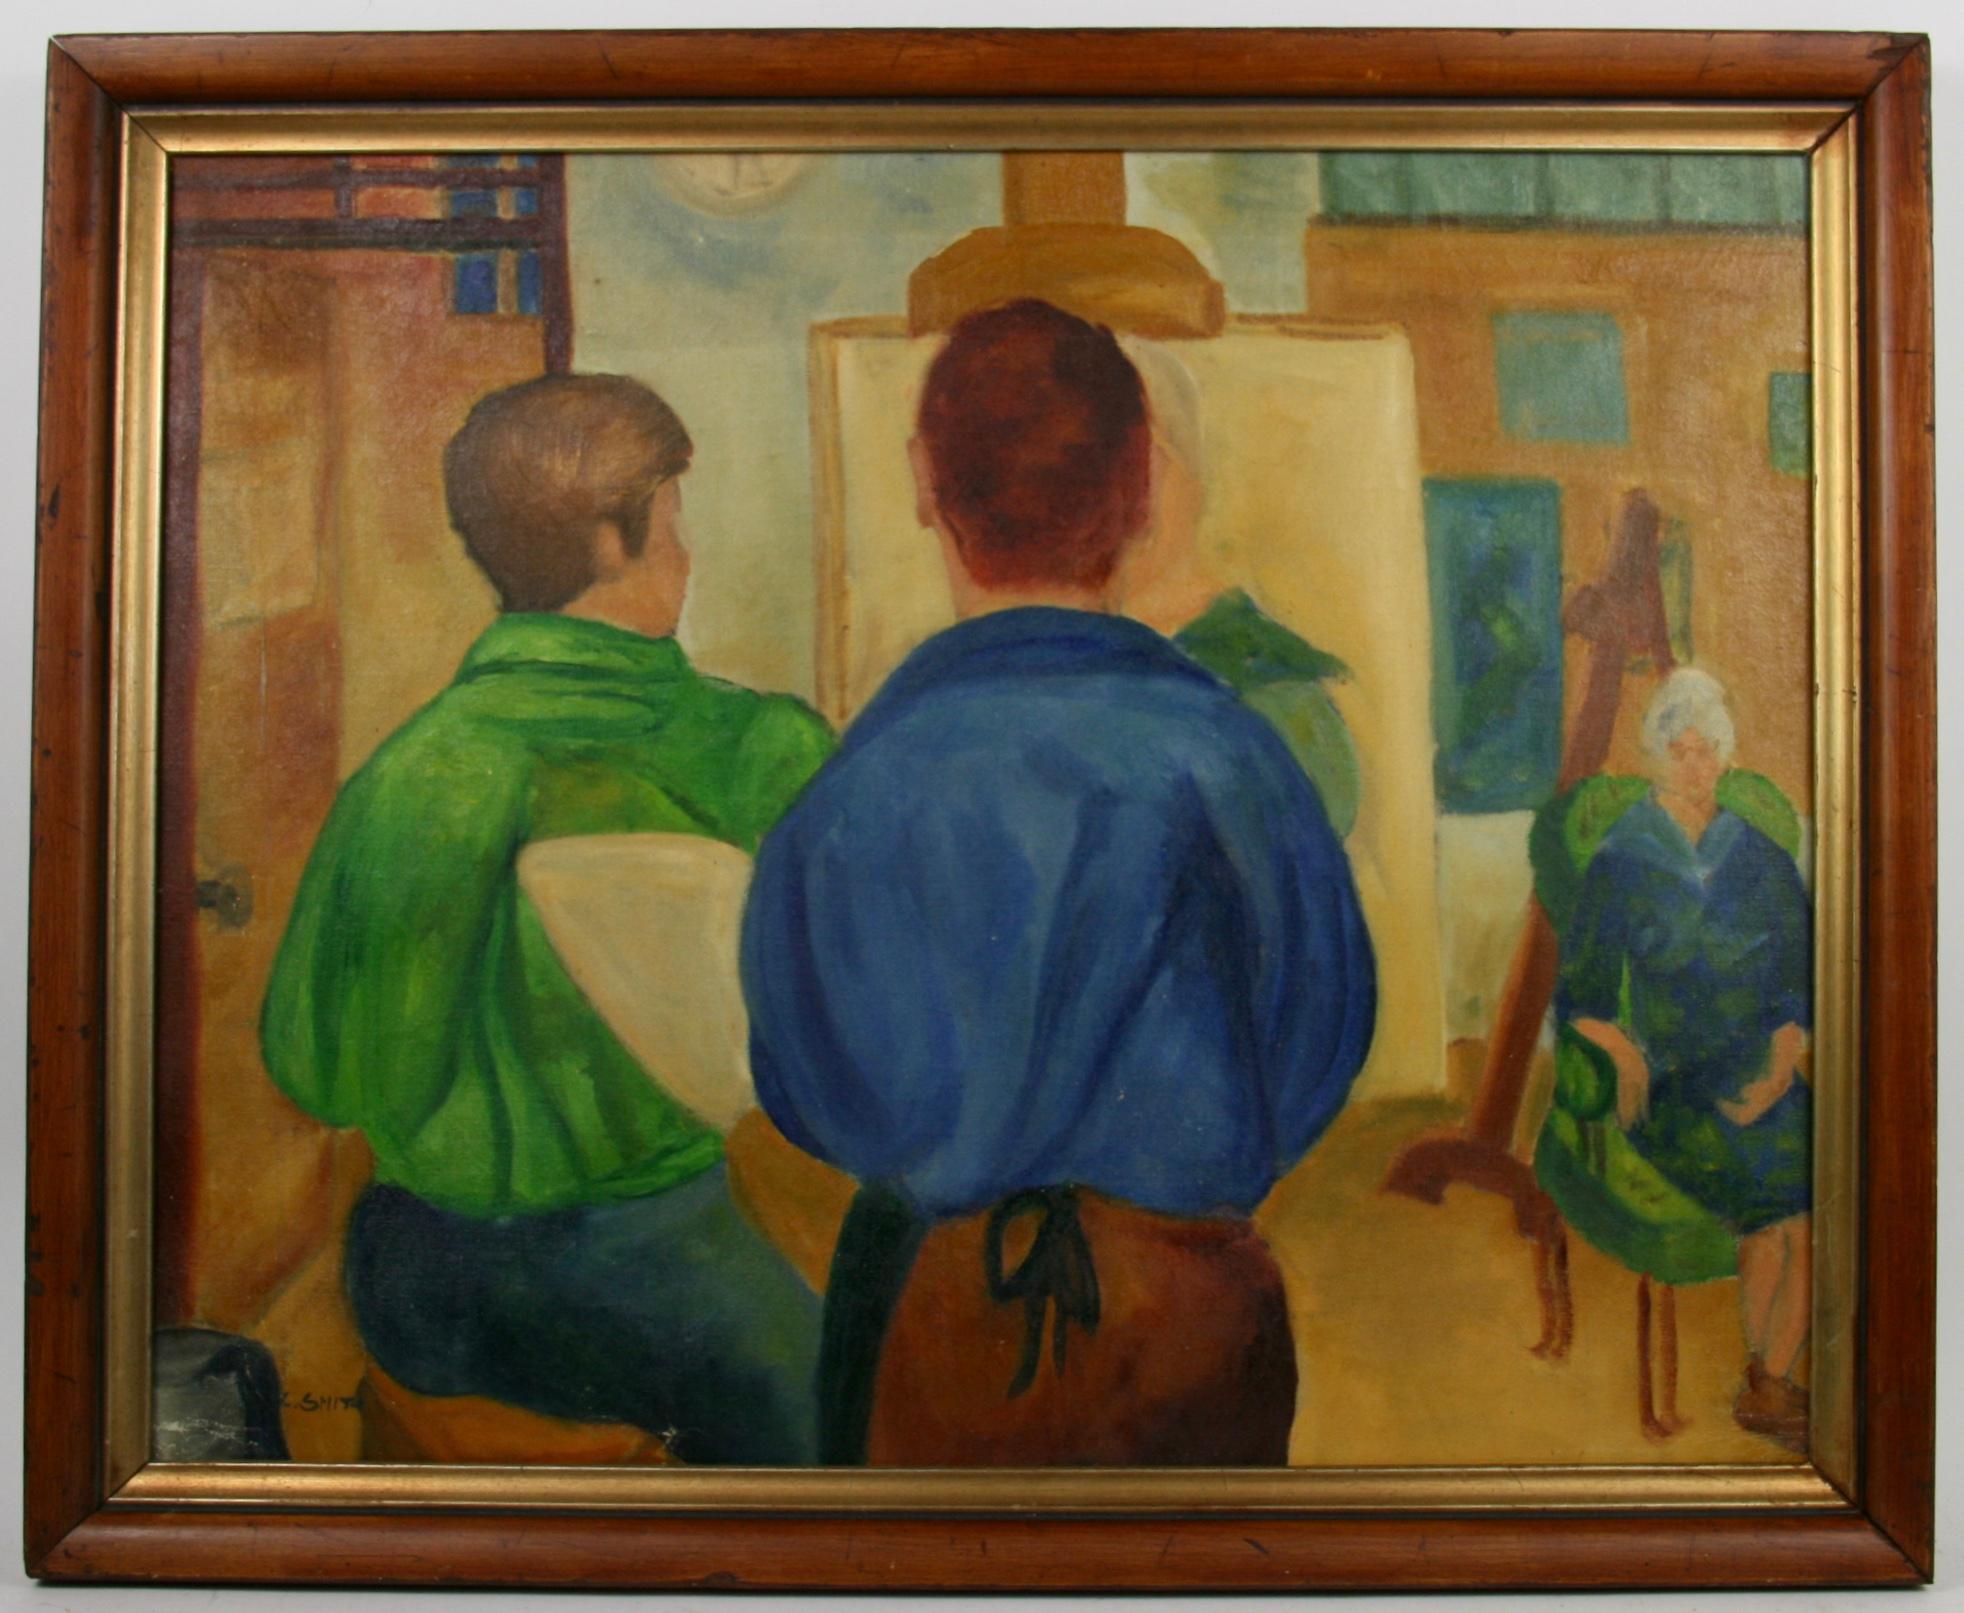 #5-3049 French  Artist Studio,a 1970's figurative painting , oil on canvas displayed in a wood frame, signed by C.smith lower left.Image size  18.5 H x 23.25 W